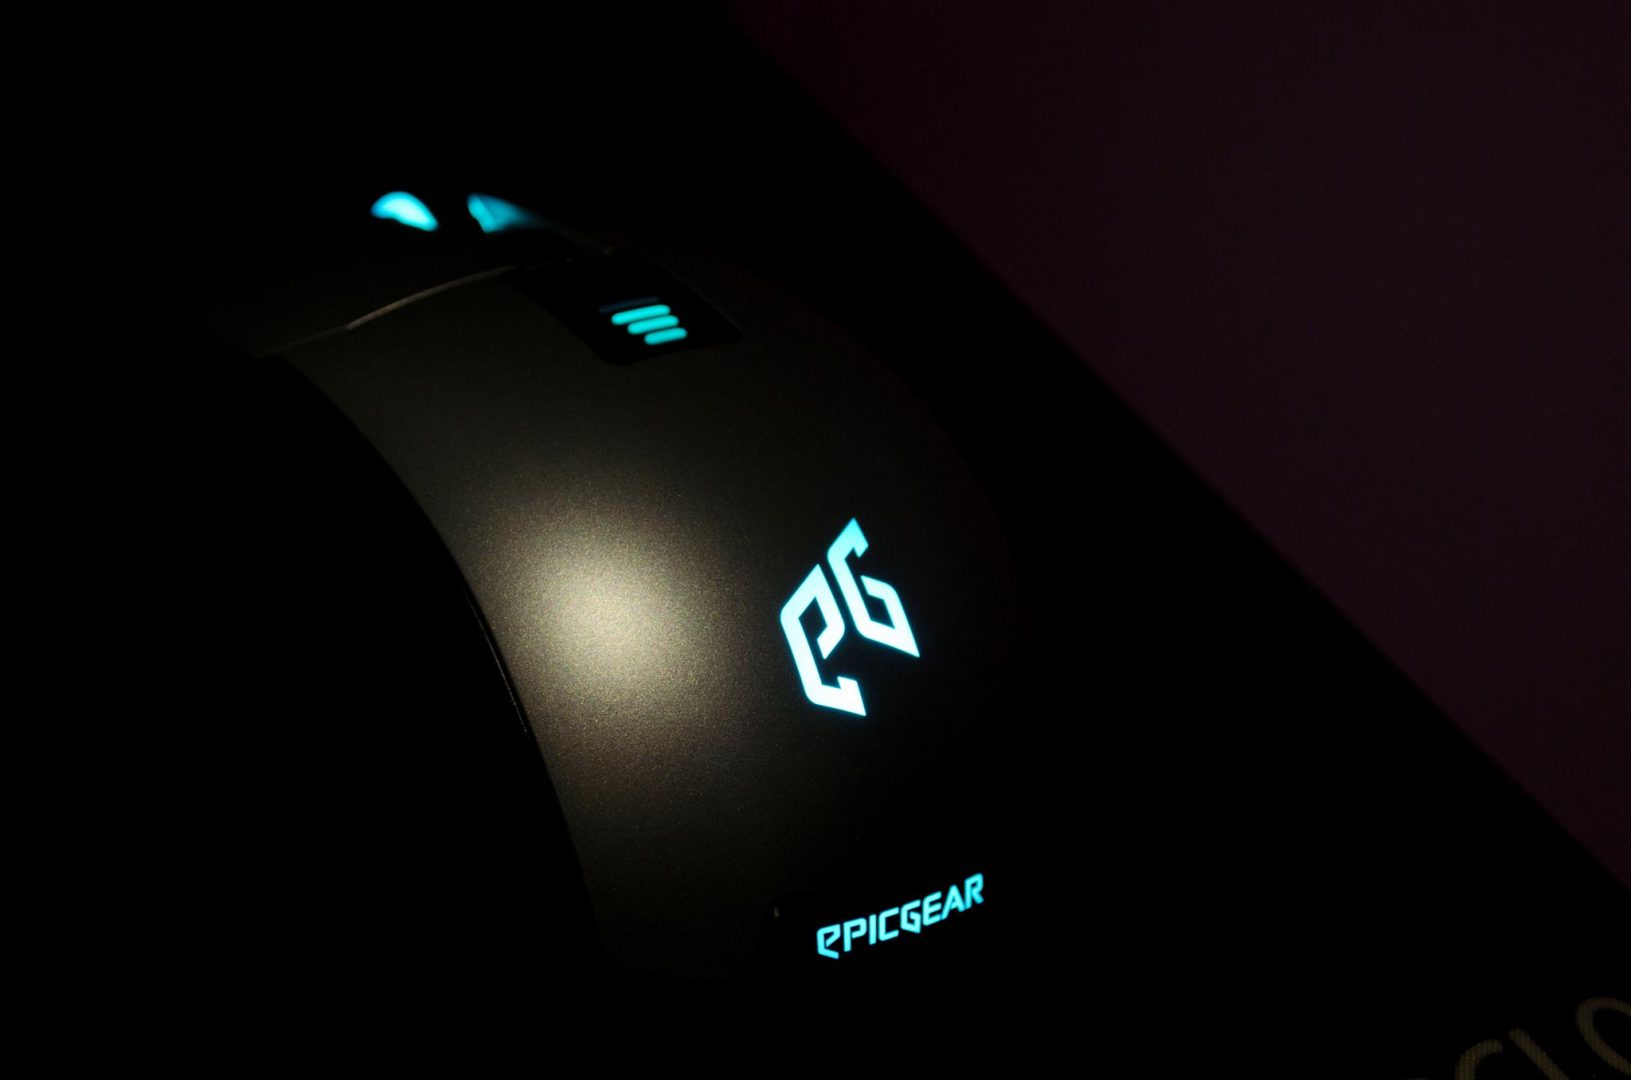 epic gear morpha x gaming mouse